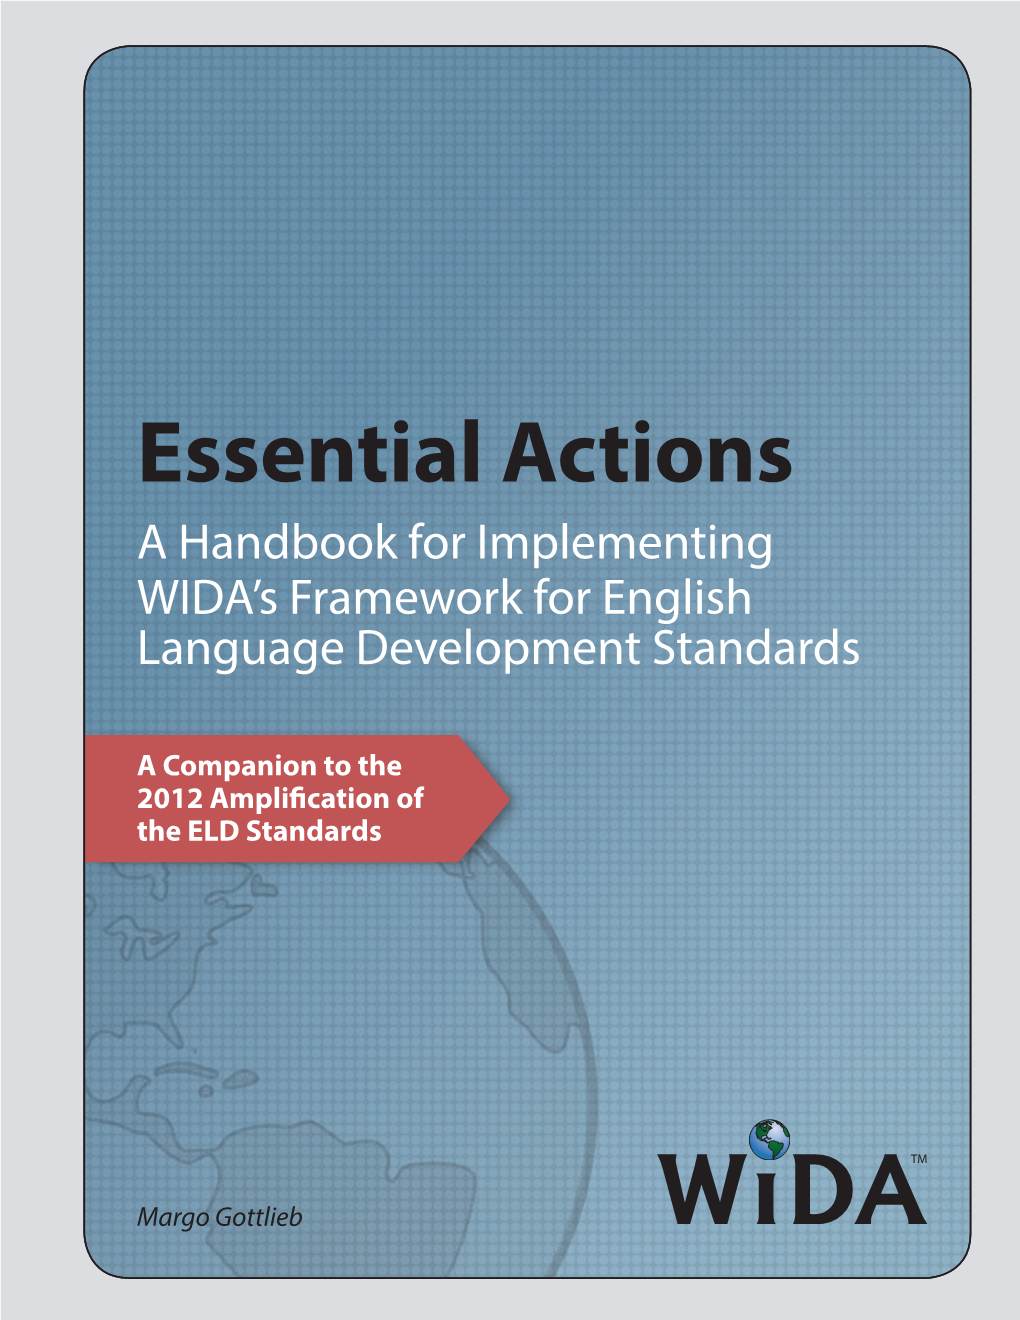 Essential Actions: a Handbook for Implementing WIDA's Framework